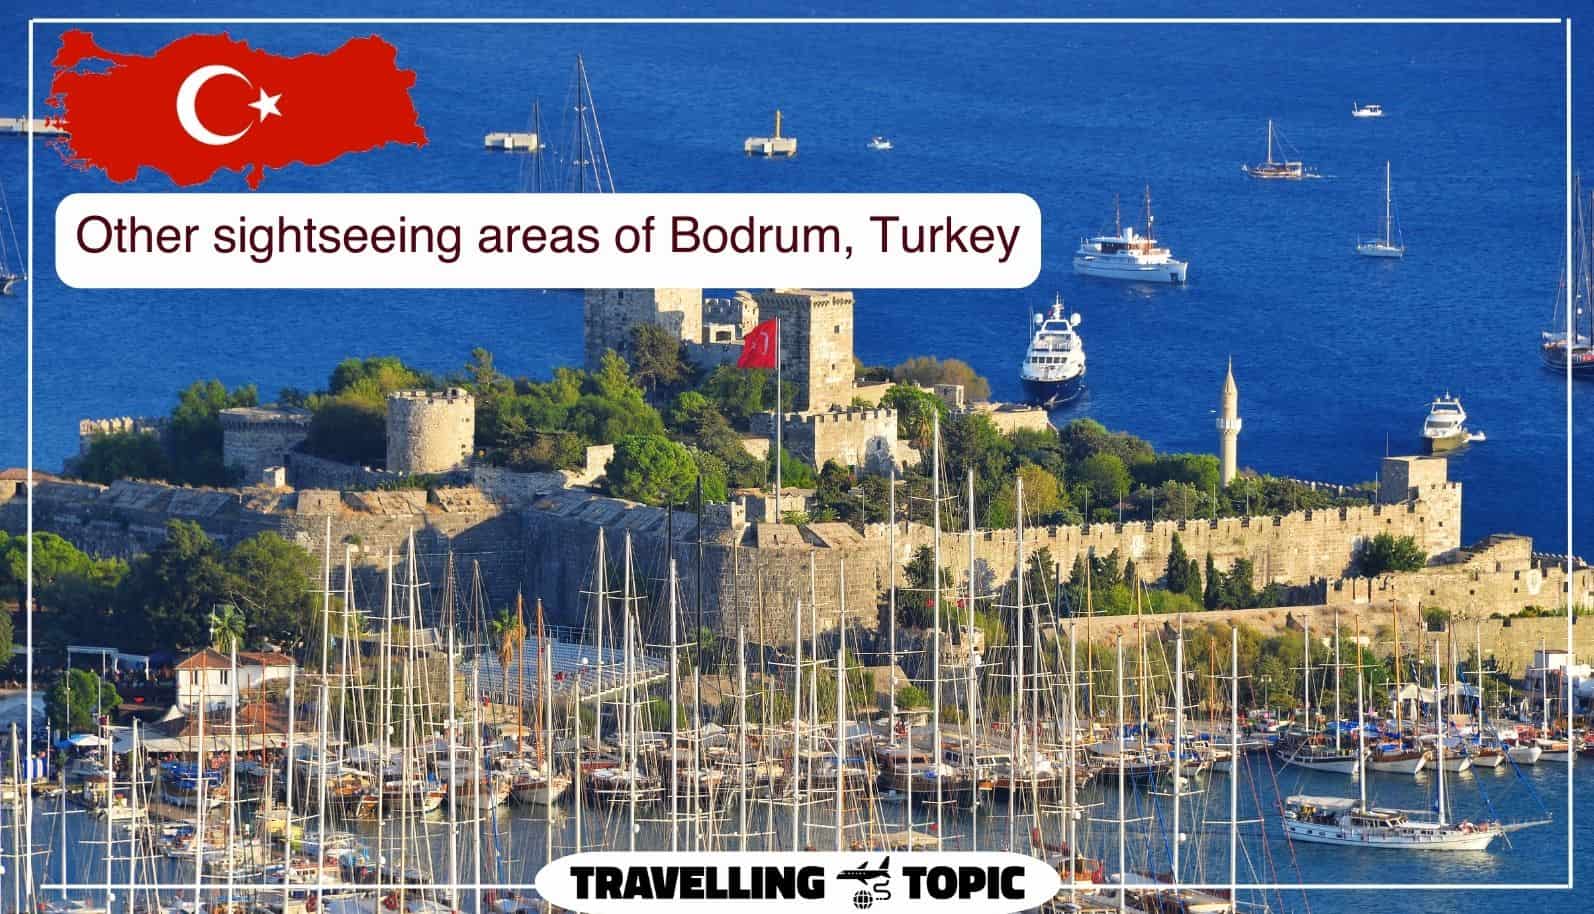 Other sightseeing areas of Bodrum, Turkey